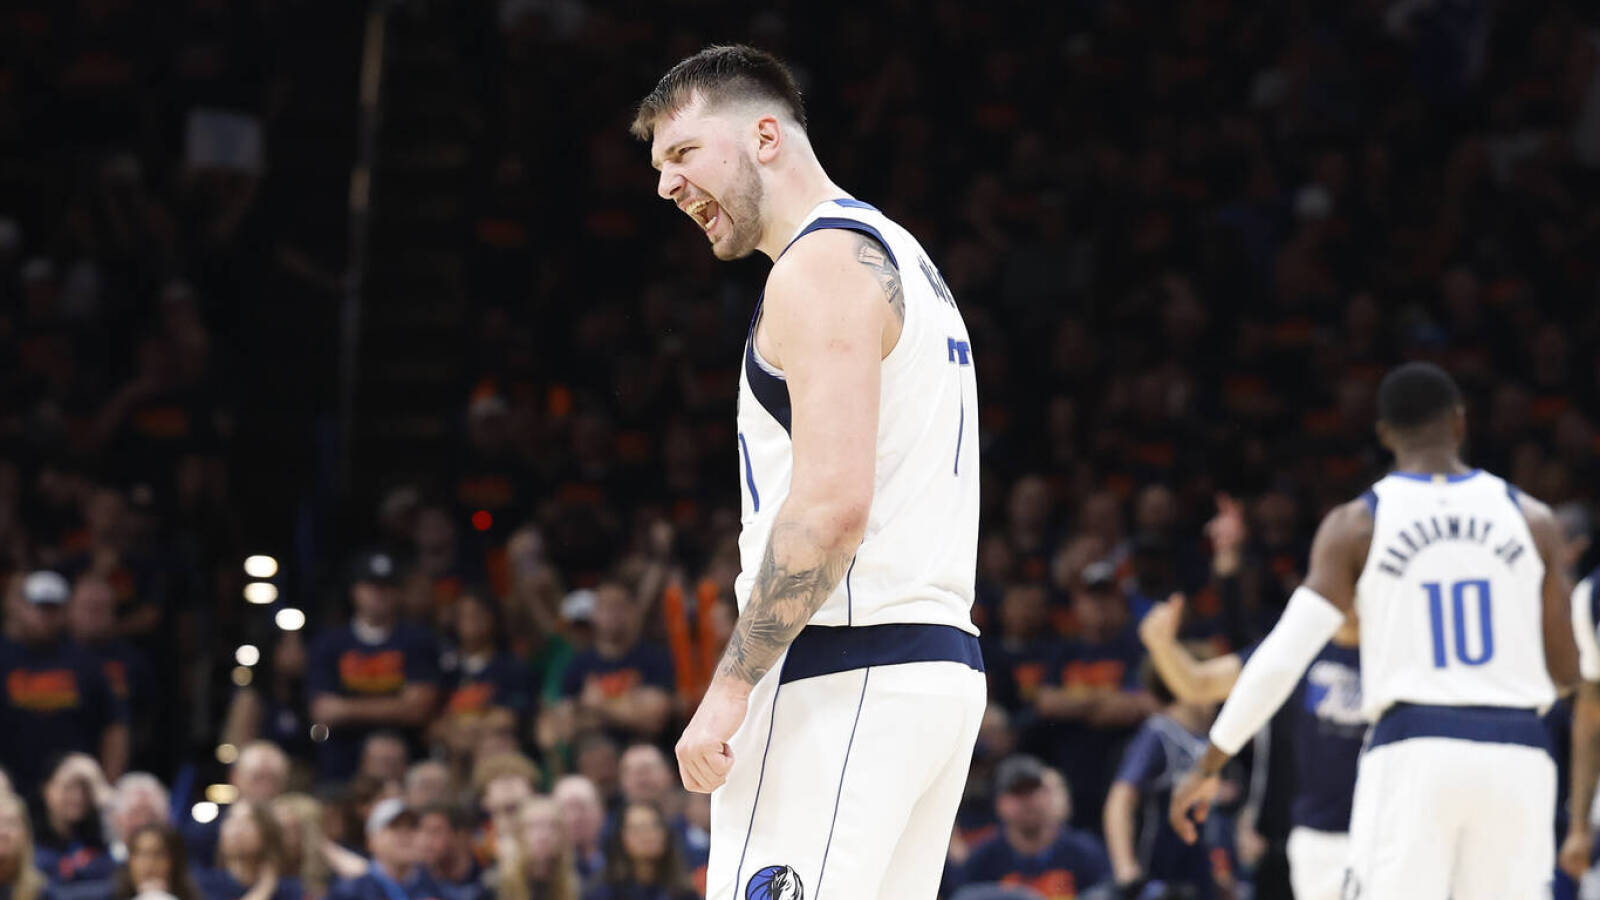 Luka Doncic fed off negative reactions in Game 5 win over Thunder